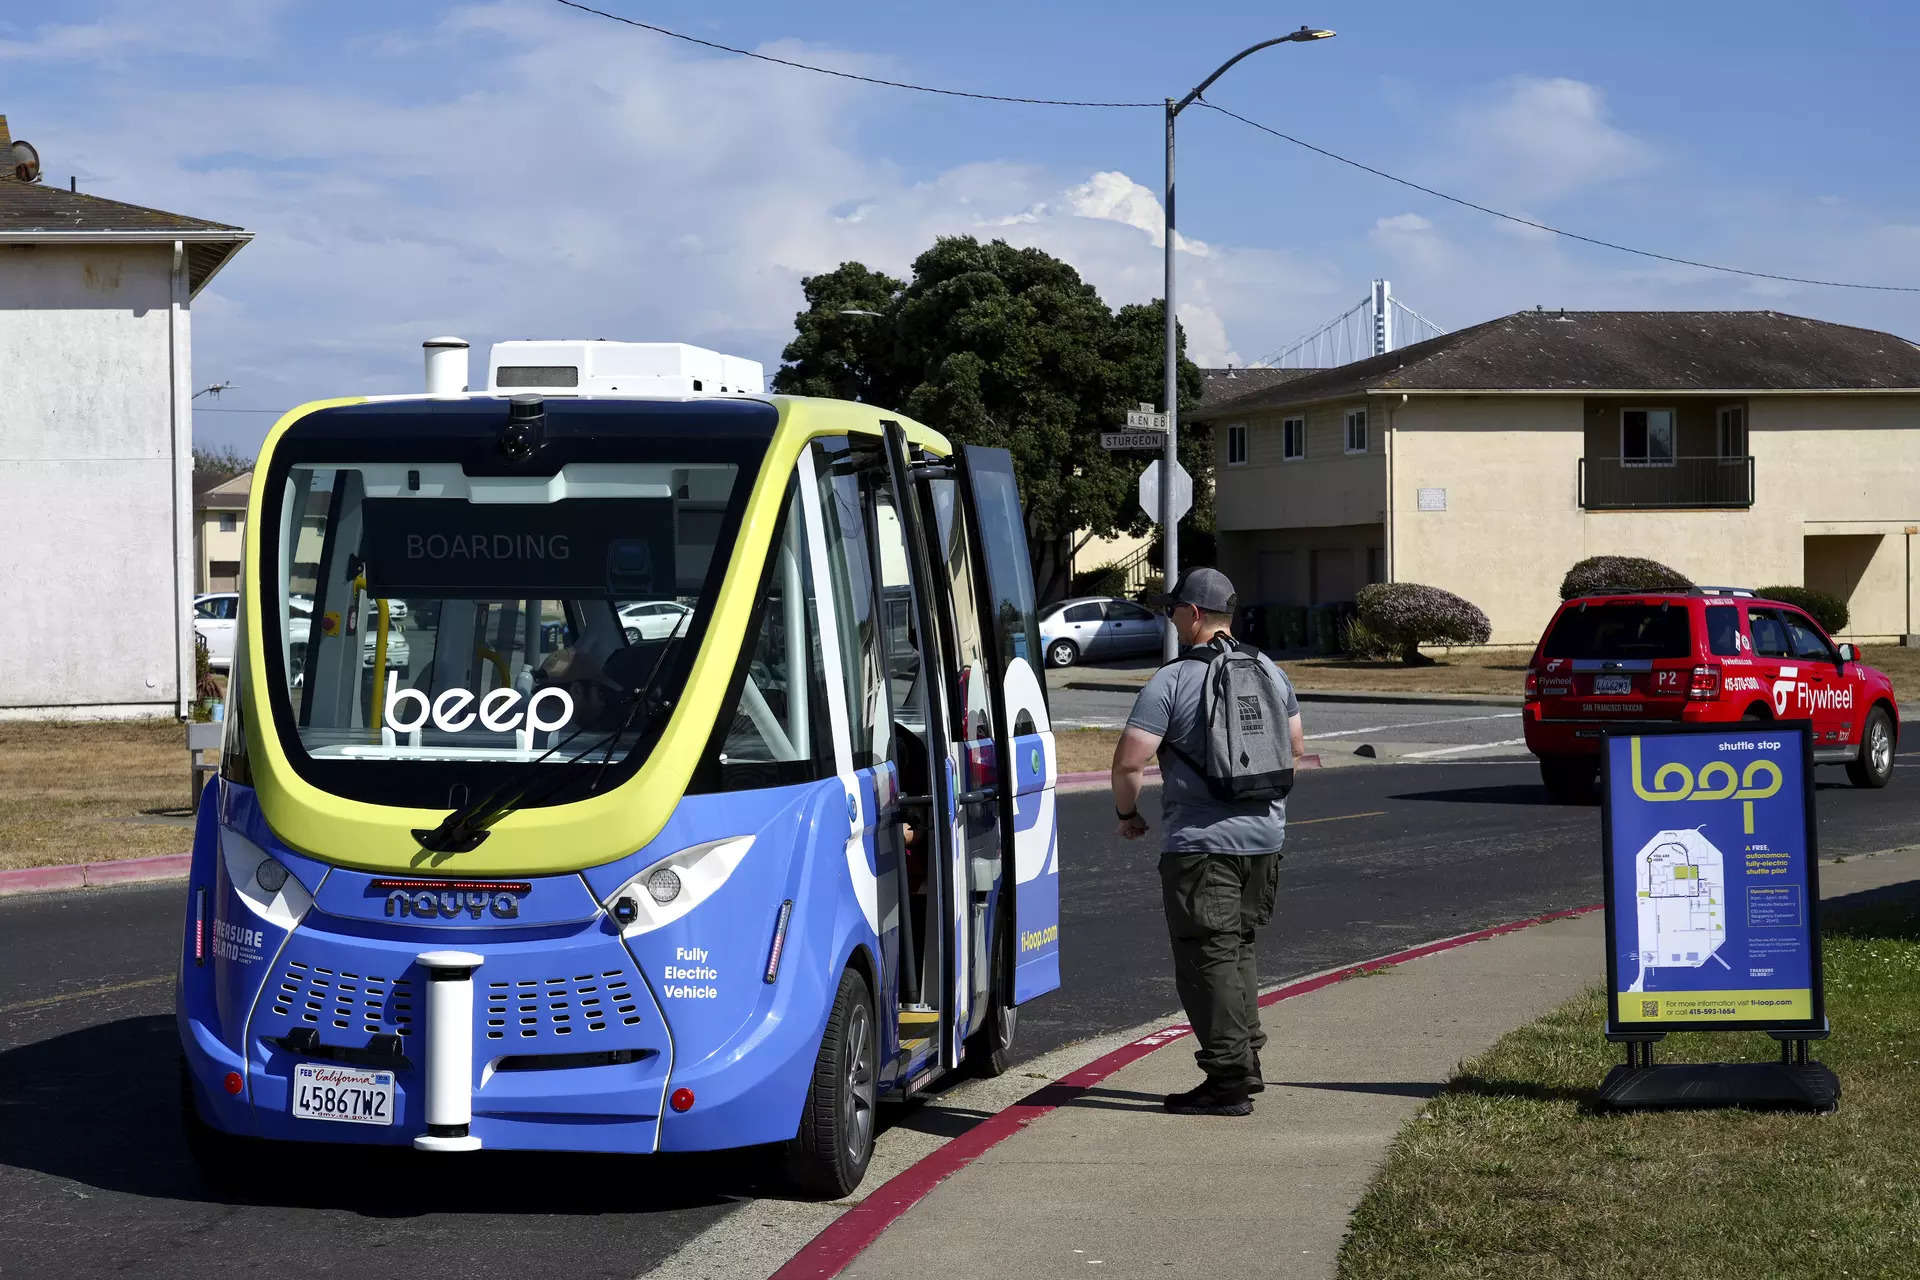 <p>"I didn't feel unsafe," said Dominic Lucchesi, an Oakland resident who was among the first to ride the autonomous shuttle. "I thought that it made some abrupt stops, but otherwise I felt like I was riding any other bus for the most part."</p>